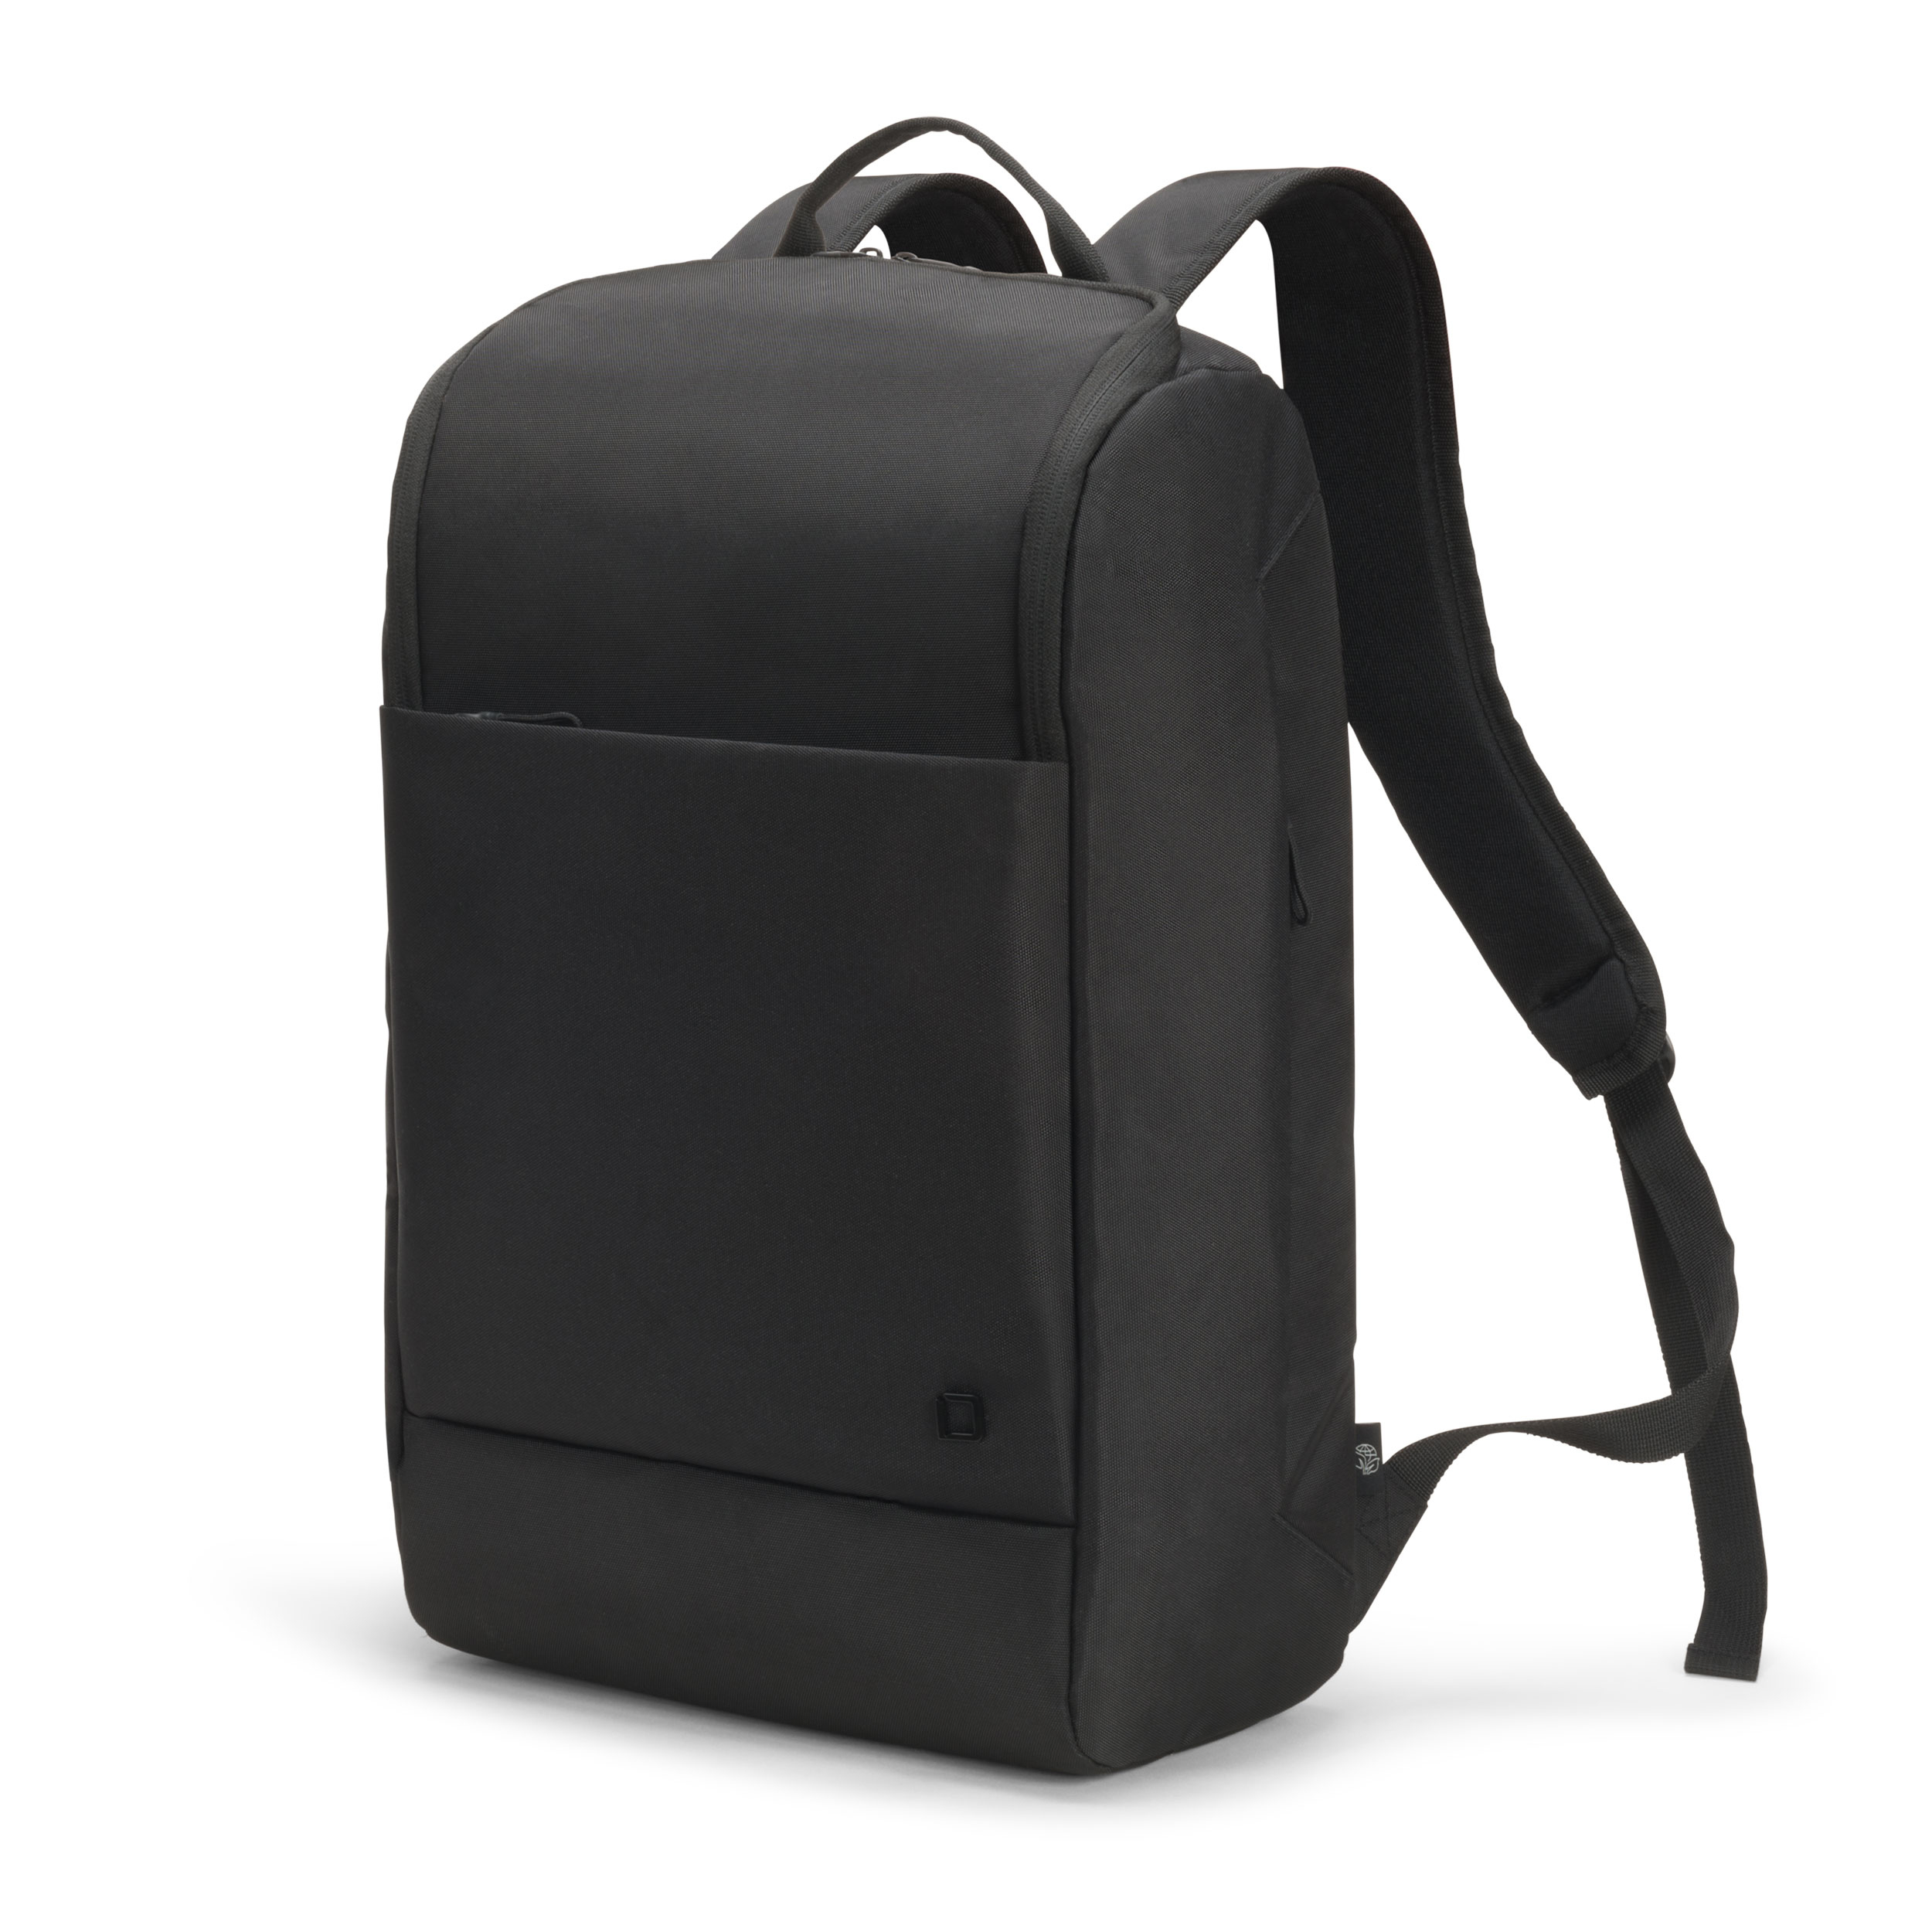 DICOTA Eco Backpack MOTION Black D31874-RPET for Universal 13 - 15.6 inch